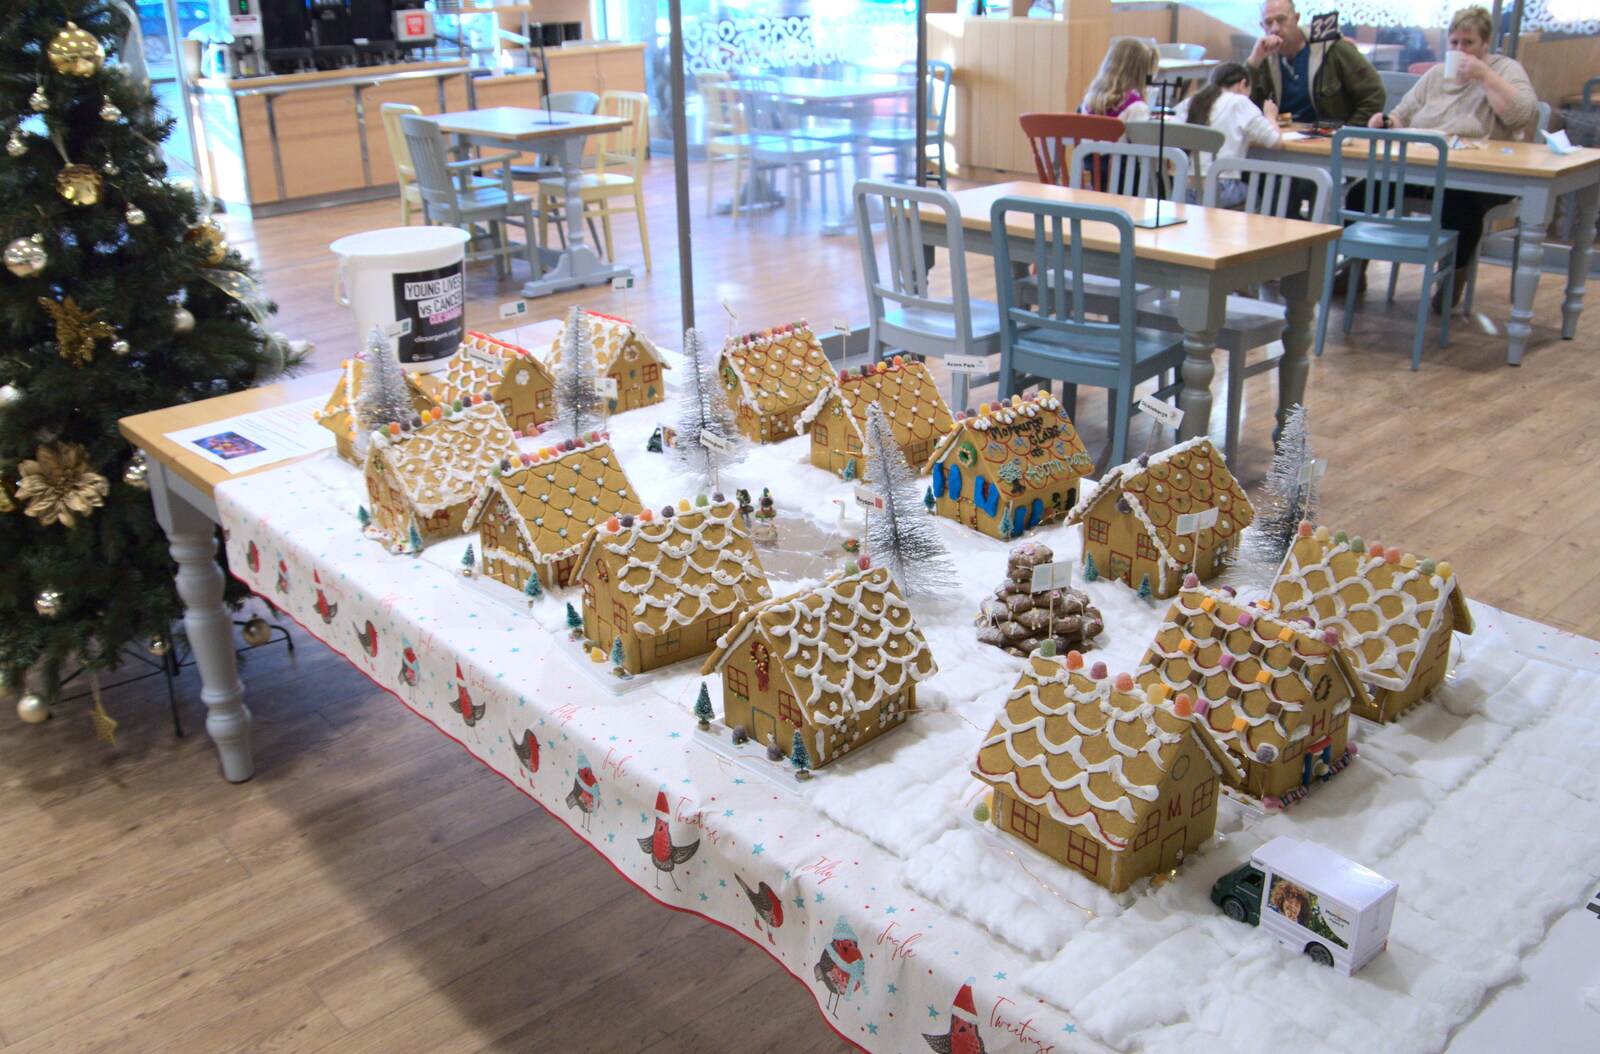 Schoolkids have made gingerbread houses from Joe Wicks and Diss on Saturday, Norfolk - 19th December 2020